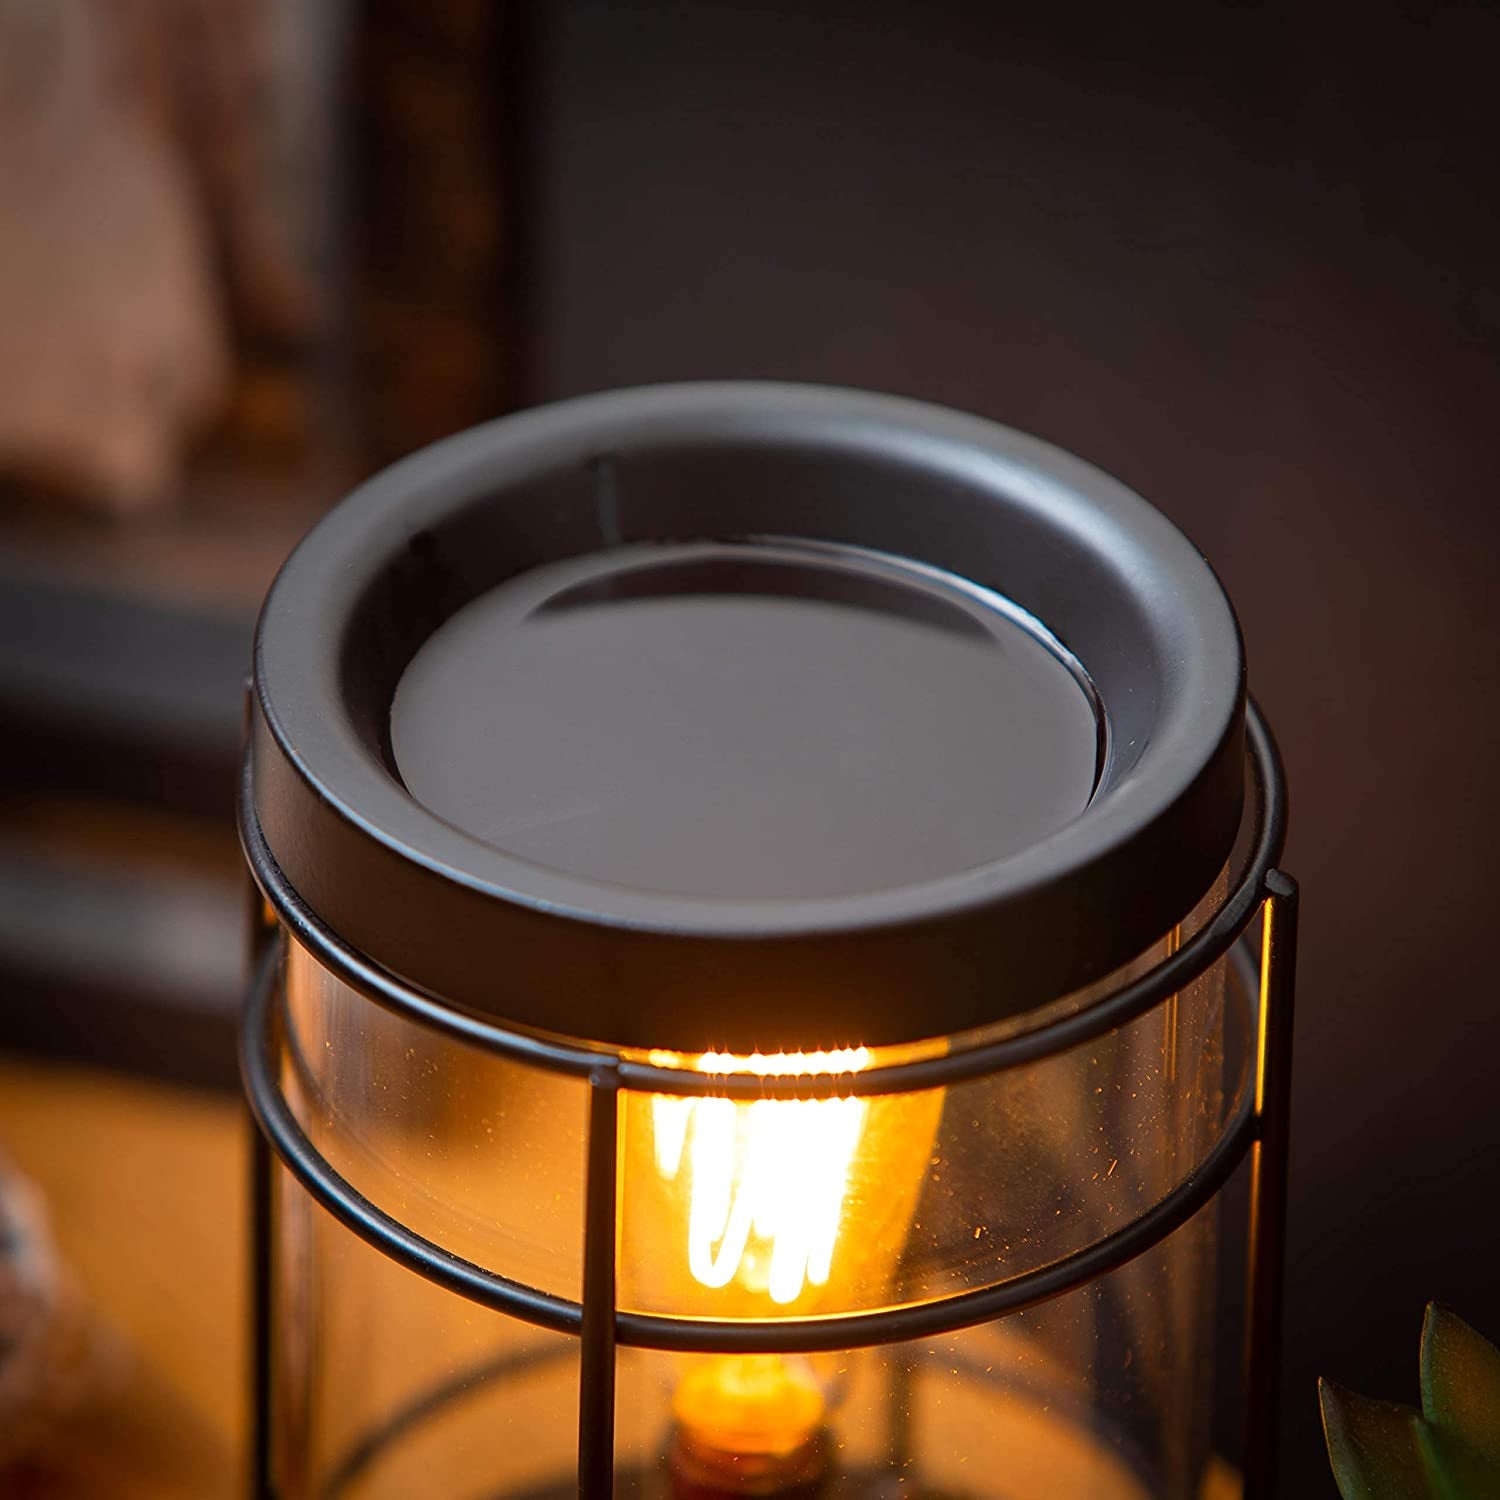 Scented Wax Melts, Cubes, TartsHome Harmony EssentialsHome Harmony EssentialsKitchen & Bar Essentials
FLAMELESS ALTERNATIVE TO CANDLES – Electric wax warmers are a safer and cleaner alternative to burning traditional candles. Simply warm your own scented wax melts iVintage Bulb Electric Candle Warmer with Timer | Black Plug in Fragran